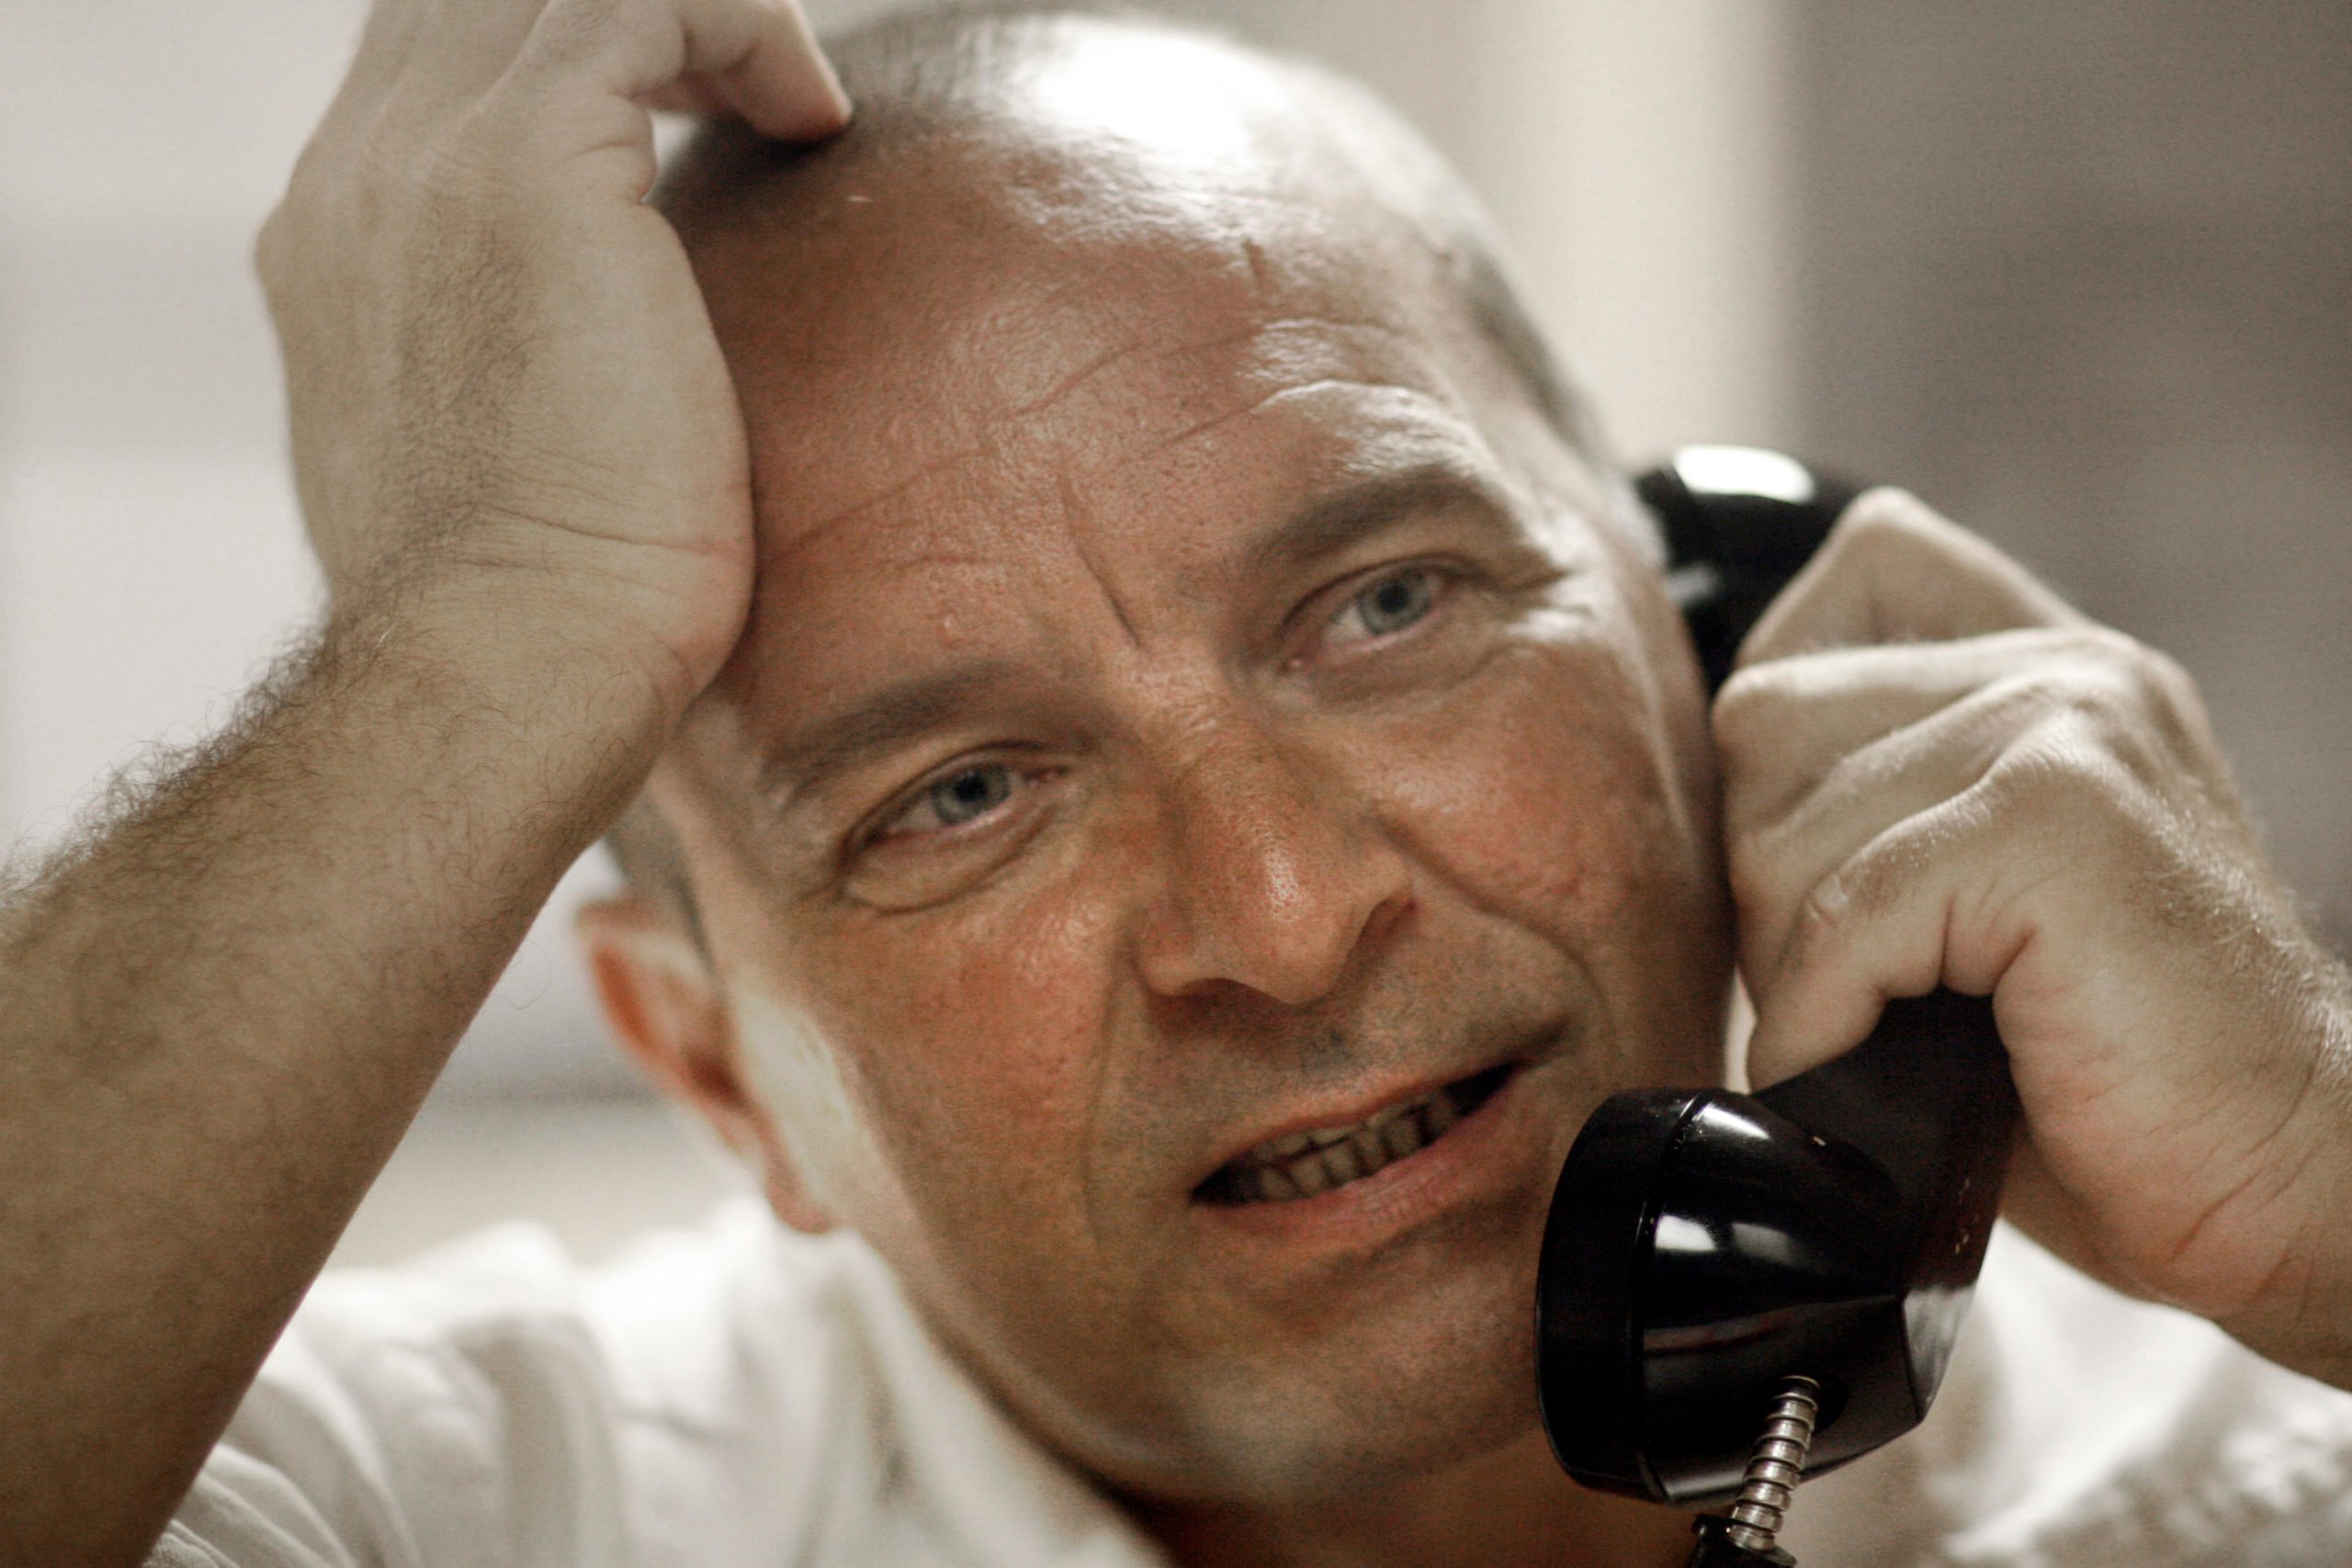 Elmer Wayne Henley, a bald white man, is seen resting his head on his hand as he speaks into a telephone handset during a prison interview.